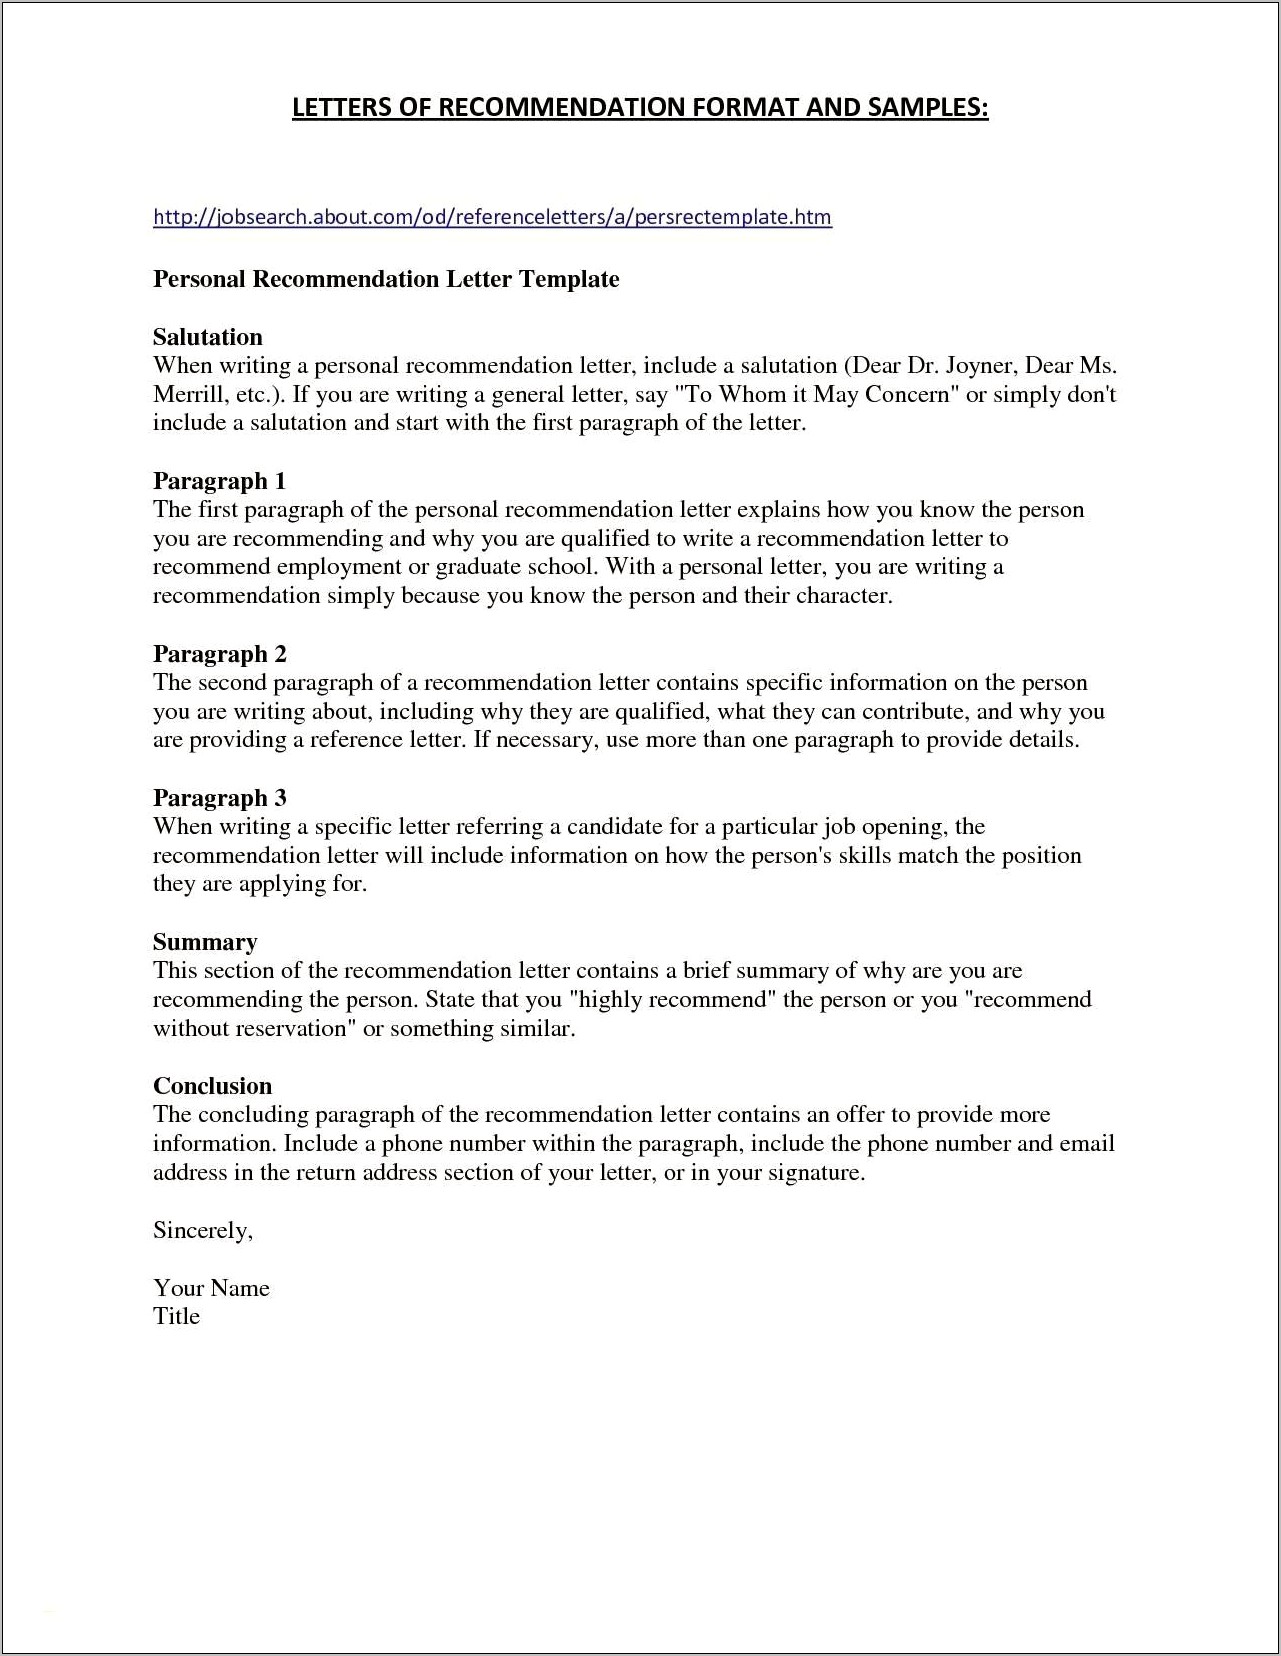 Resume Cover Letter With Unknown Recepiant